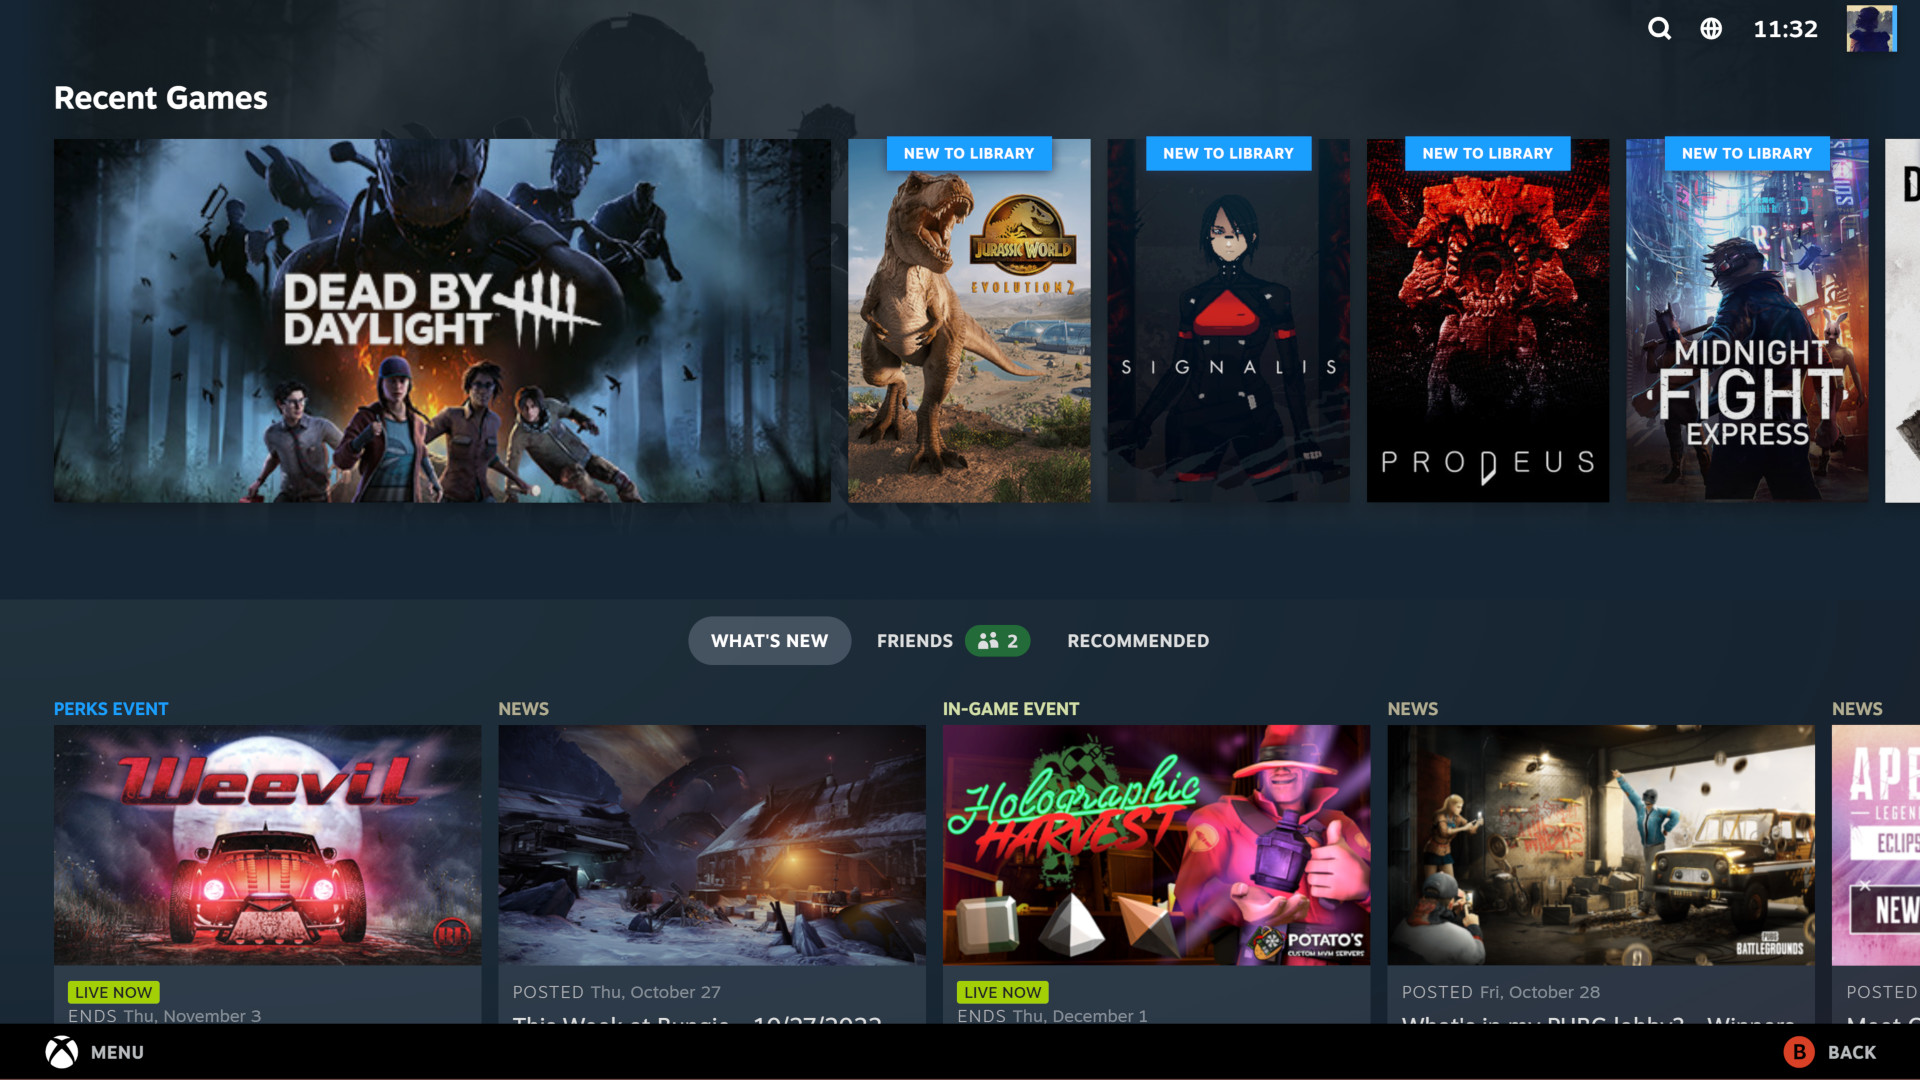 At long last, the Steam Deck UI has replaced Steam's Big Picture mode